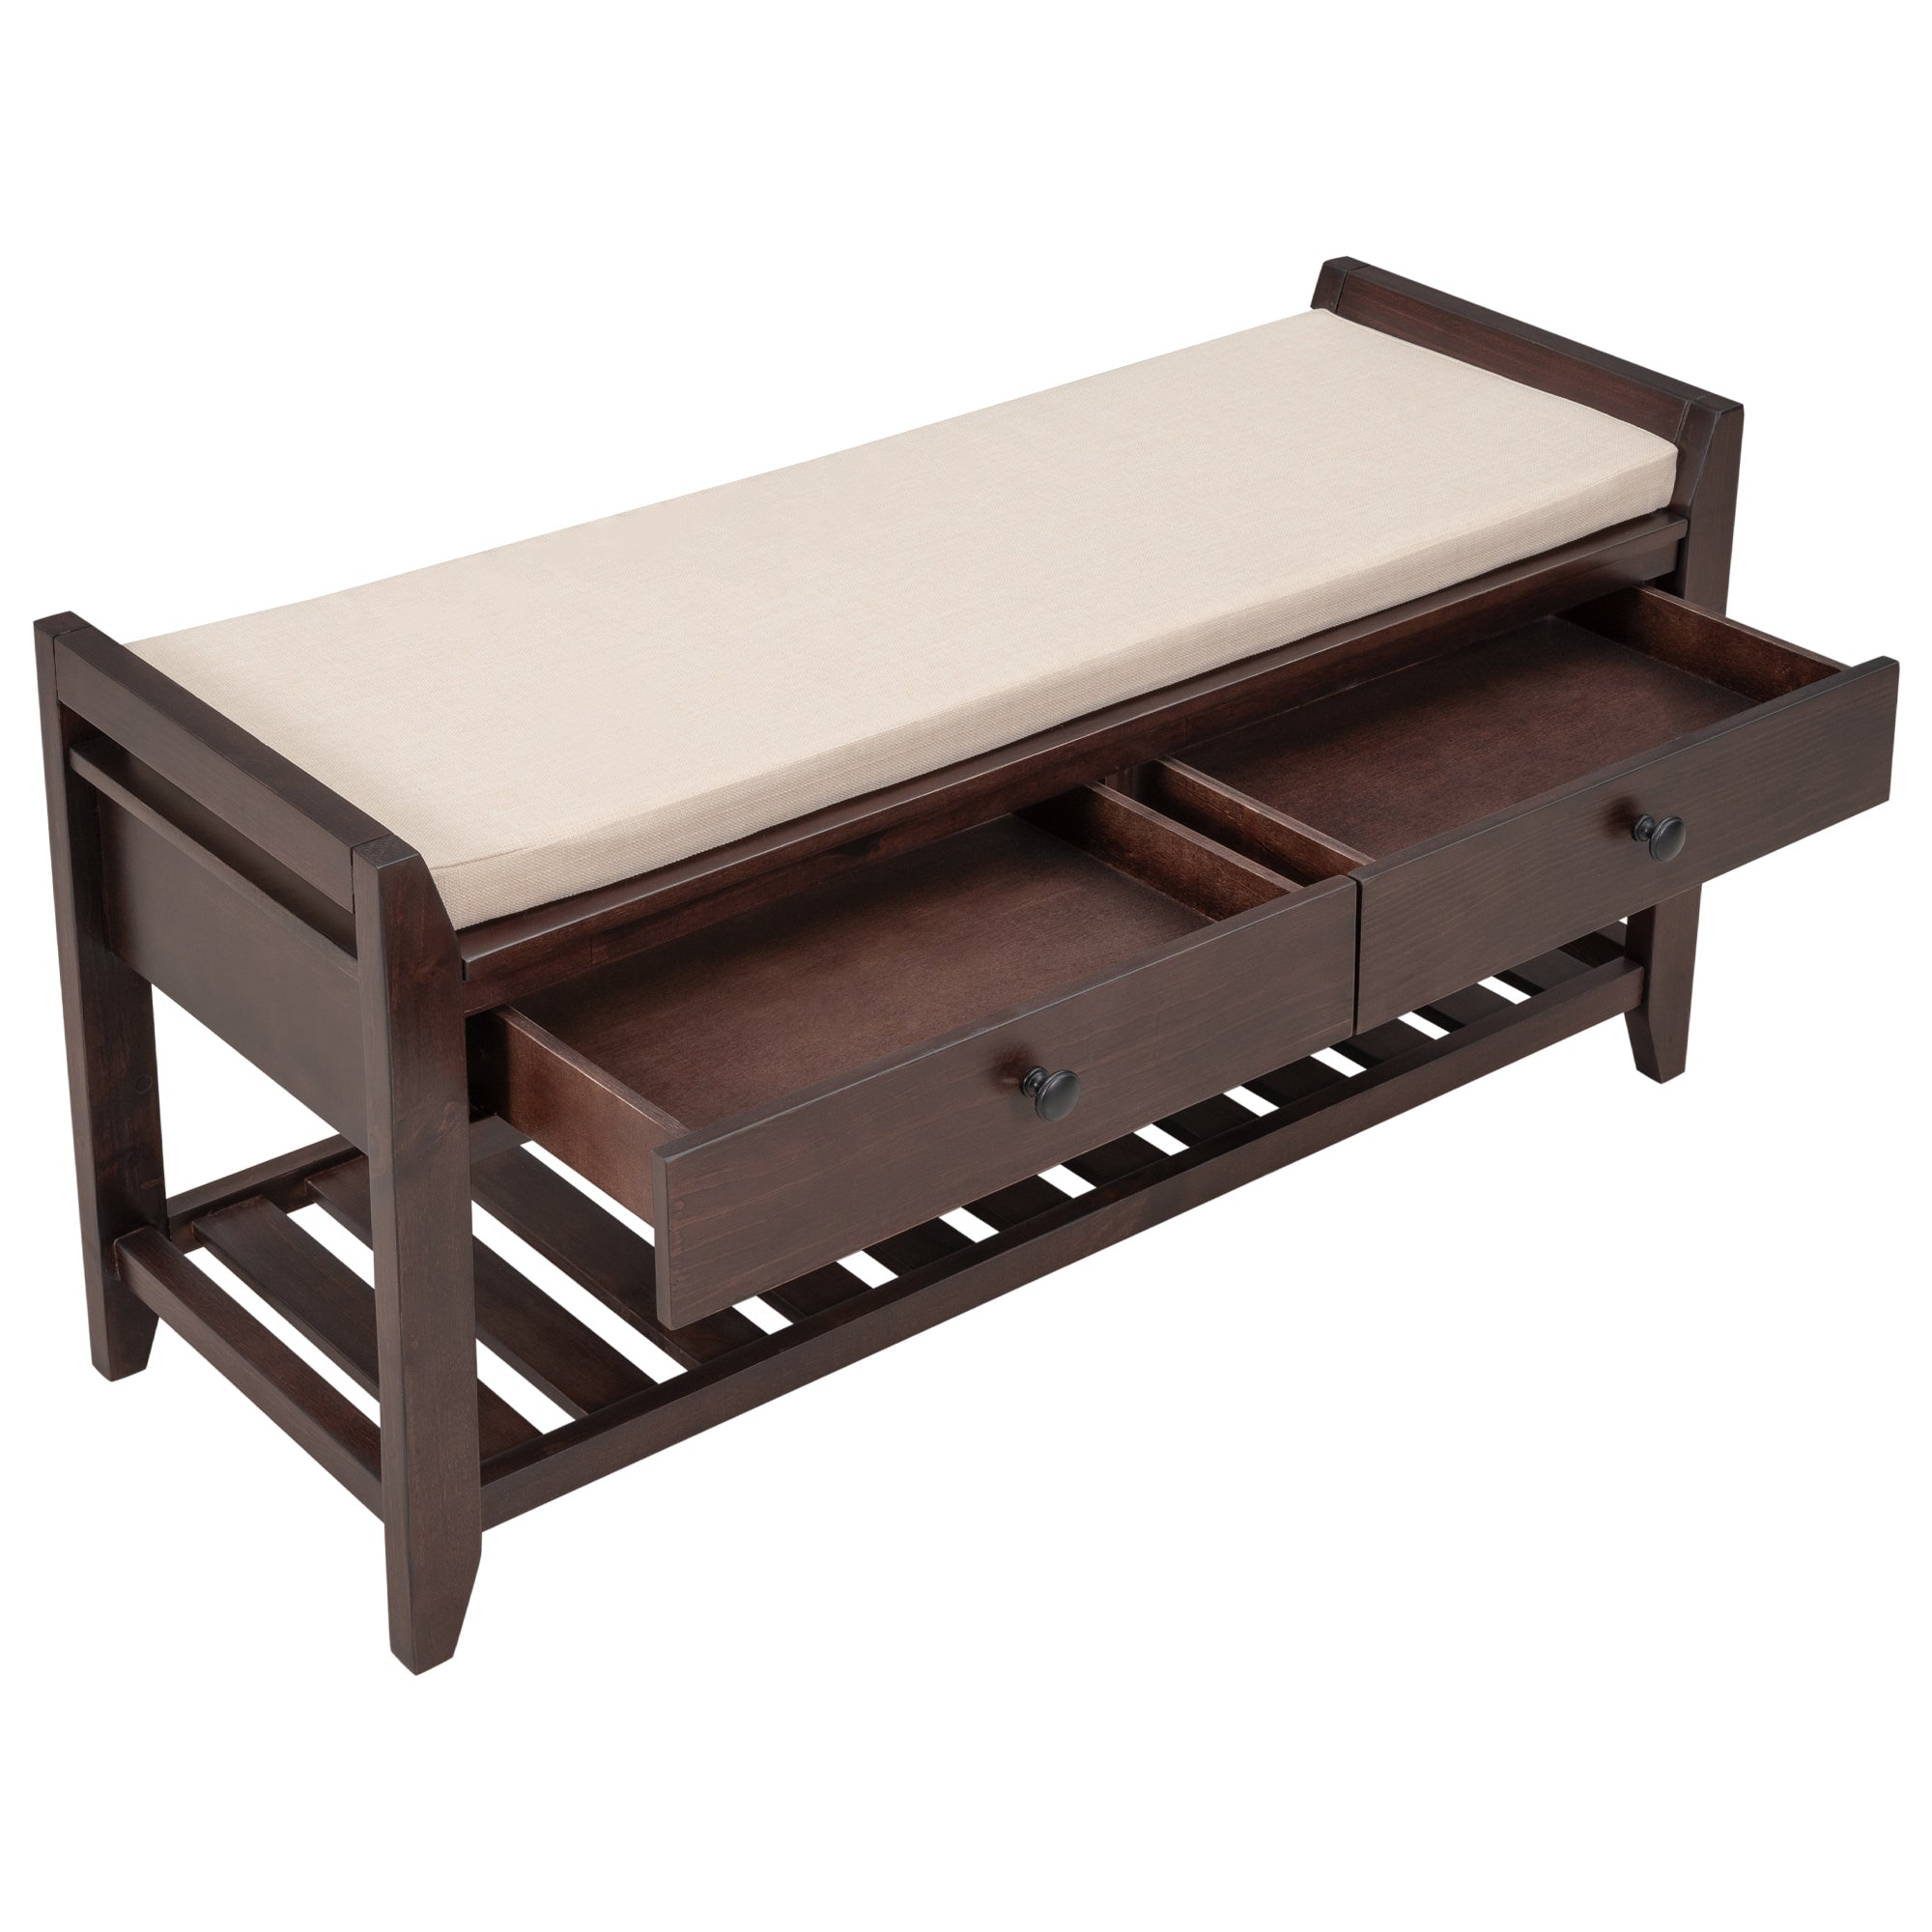 39" Espresso Storage Seating Bench With Drawers and Undershelf